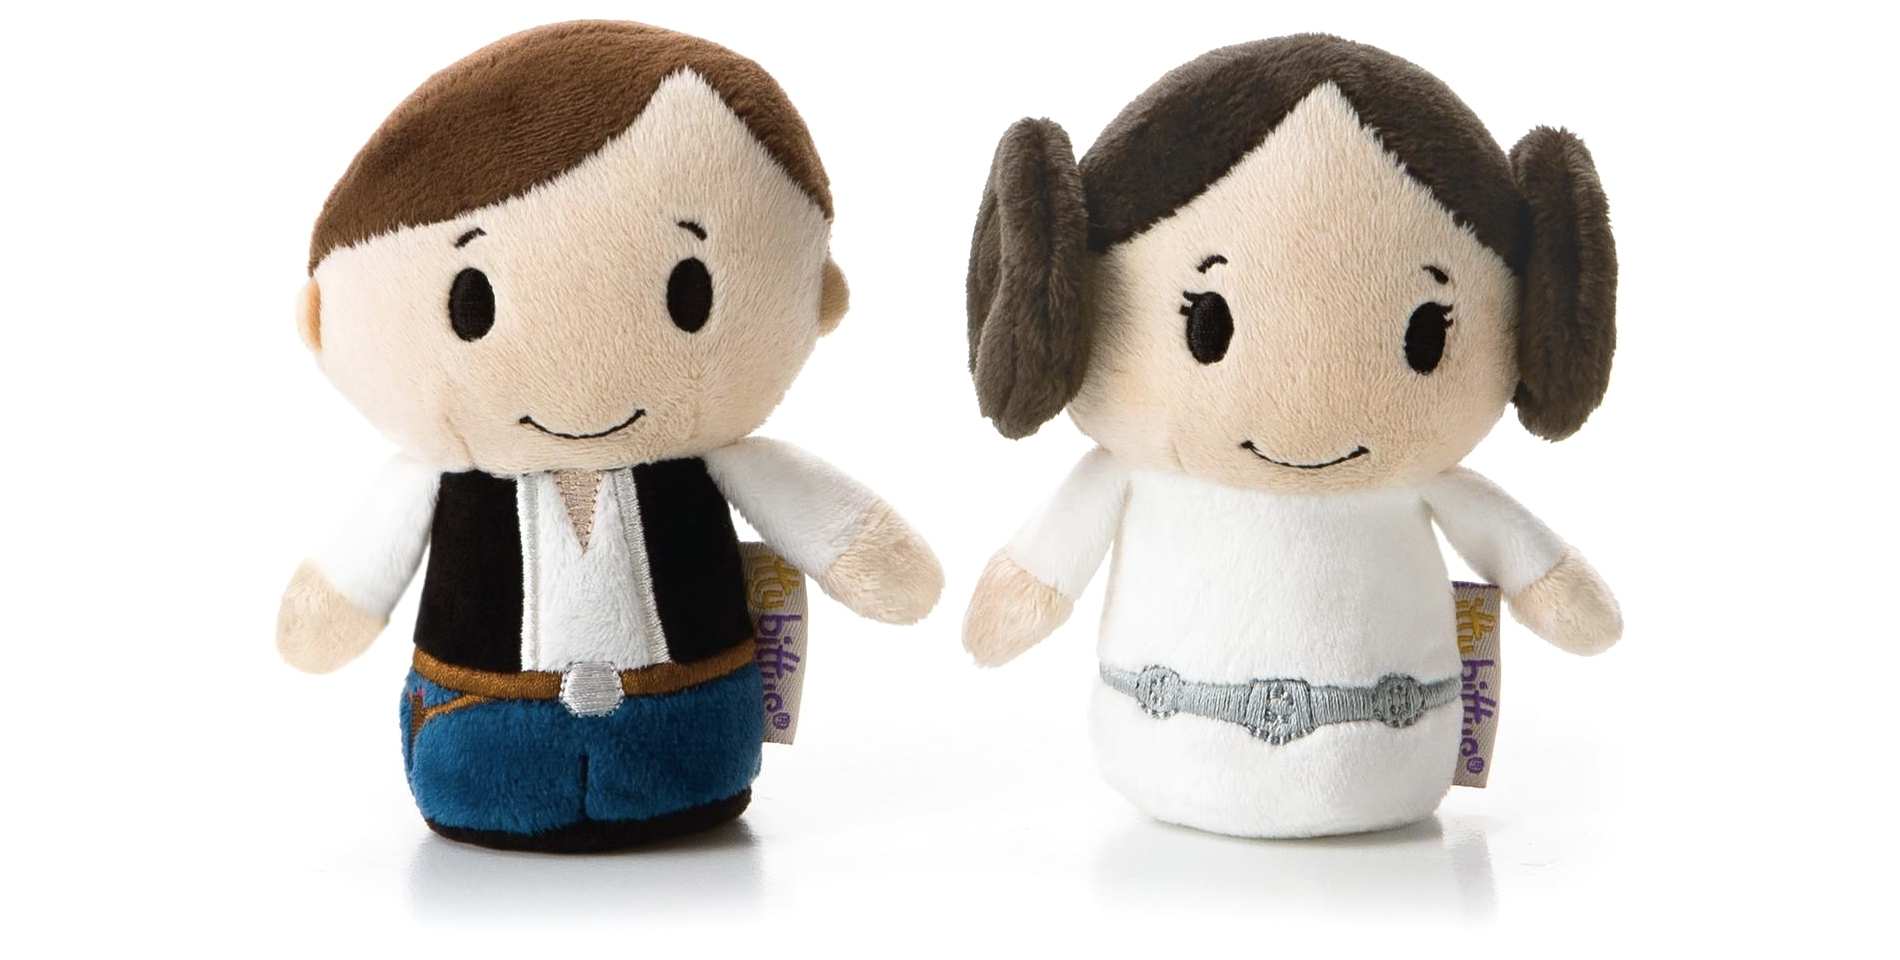 Hallmark Made Star Wars Toys So Impossibly Cute Your Head Will Explode